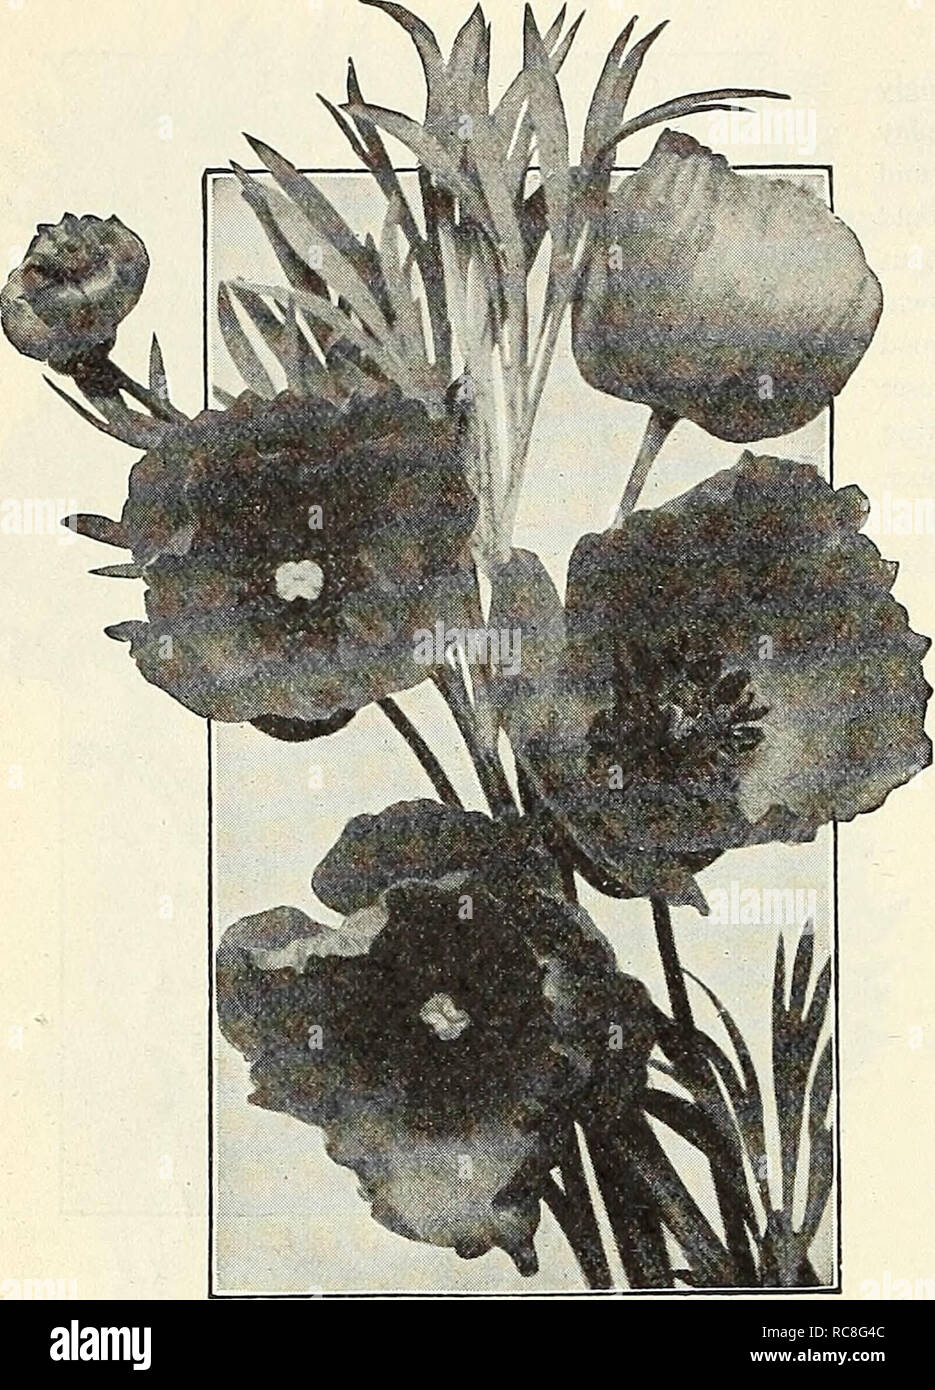 . Dreer's garden book 1930. Seeds Catalogs; Nursery stock Catalogs; Gardening Equipment and supplies Catalogs; Flowers Seeds Catalogs; Vegetables Seeds Catalogs; Fruit Seeds Catalogs. 92 jioragji RELIABLE FLOWER SEEDS; MMBWlt. Hunnemannia (Giant Yellow Tulip Poppy, Santa Barbara Poppy or Bush Eschscholtzia) PER PKT. 2821 Fumariaef olia. This is by far the best ot the poppy family for cutting, remaining in good condition for several days. Seed sown early in May will, by the middle of July, produce plants covered with their large buttercup-yellow poppy-like blossoms, and never out of flower unti Stock Photo